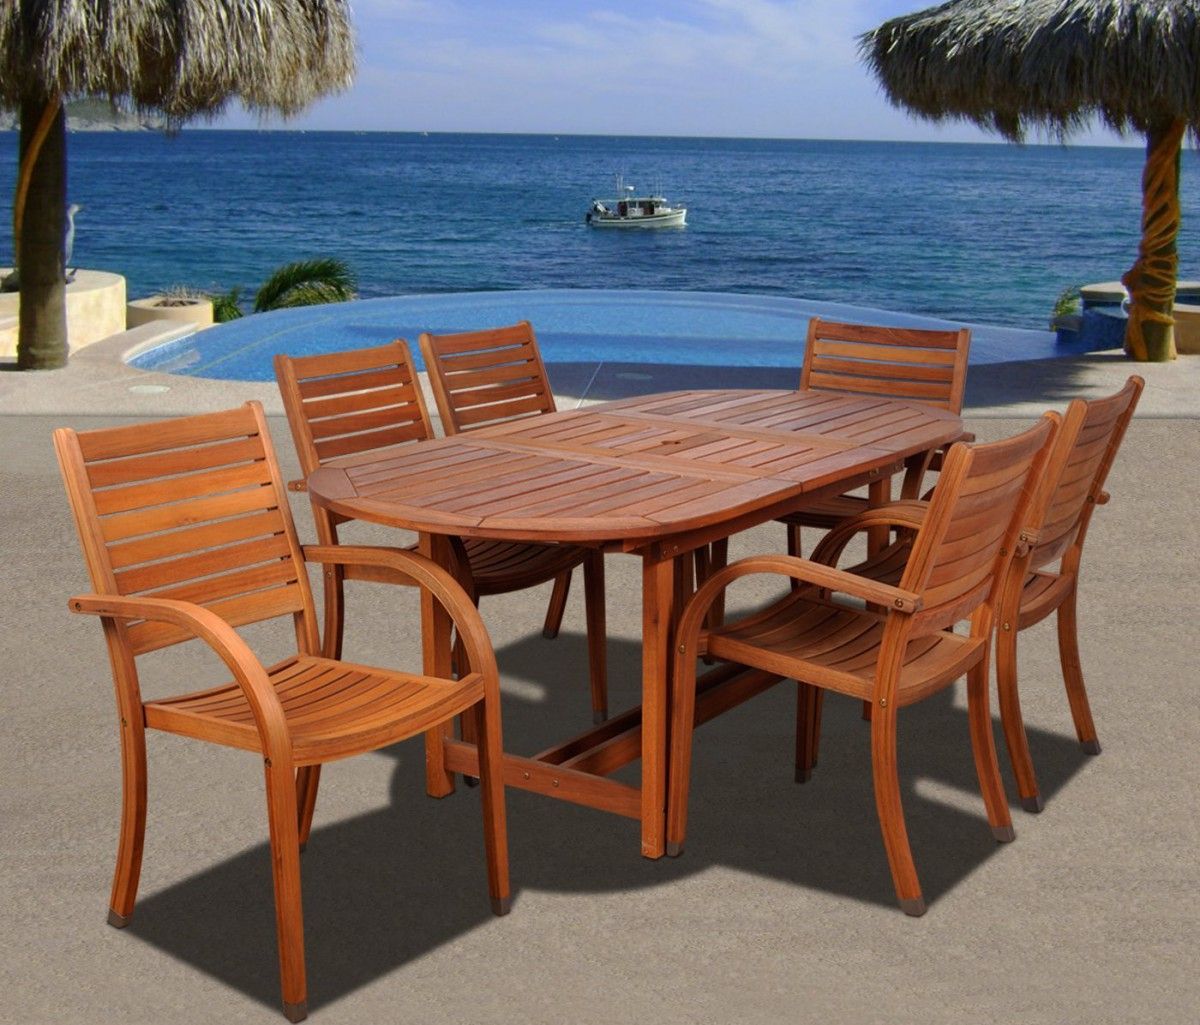 7 Piece Large Patio Dining Sets With Well Liked Amazonia Arizona 7 Piece Wood Outdoor Dining Set With 83" Oval Table (View 9 of 15)